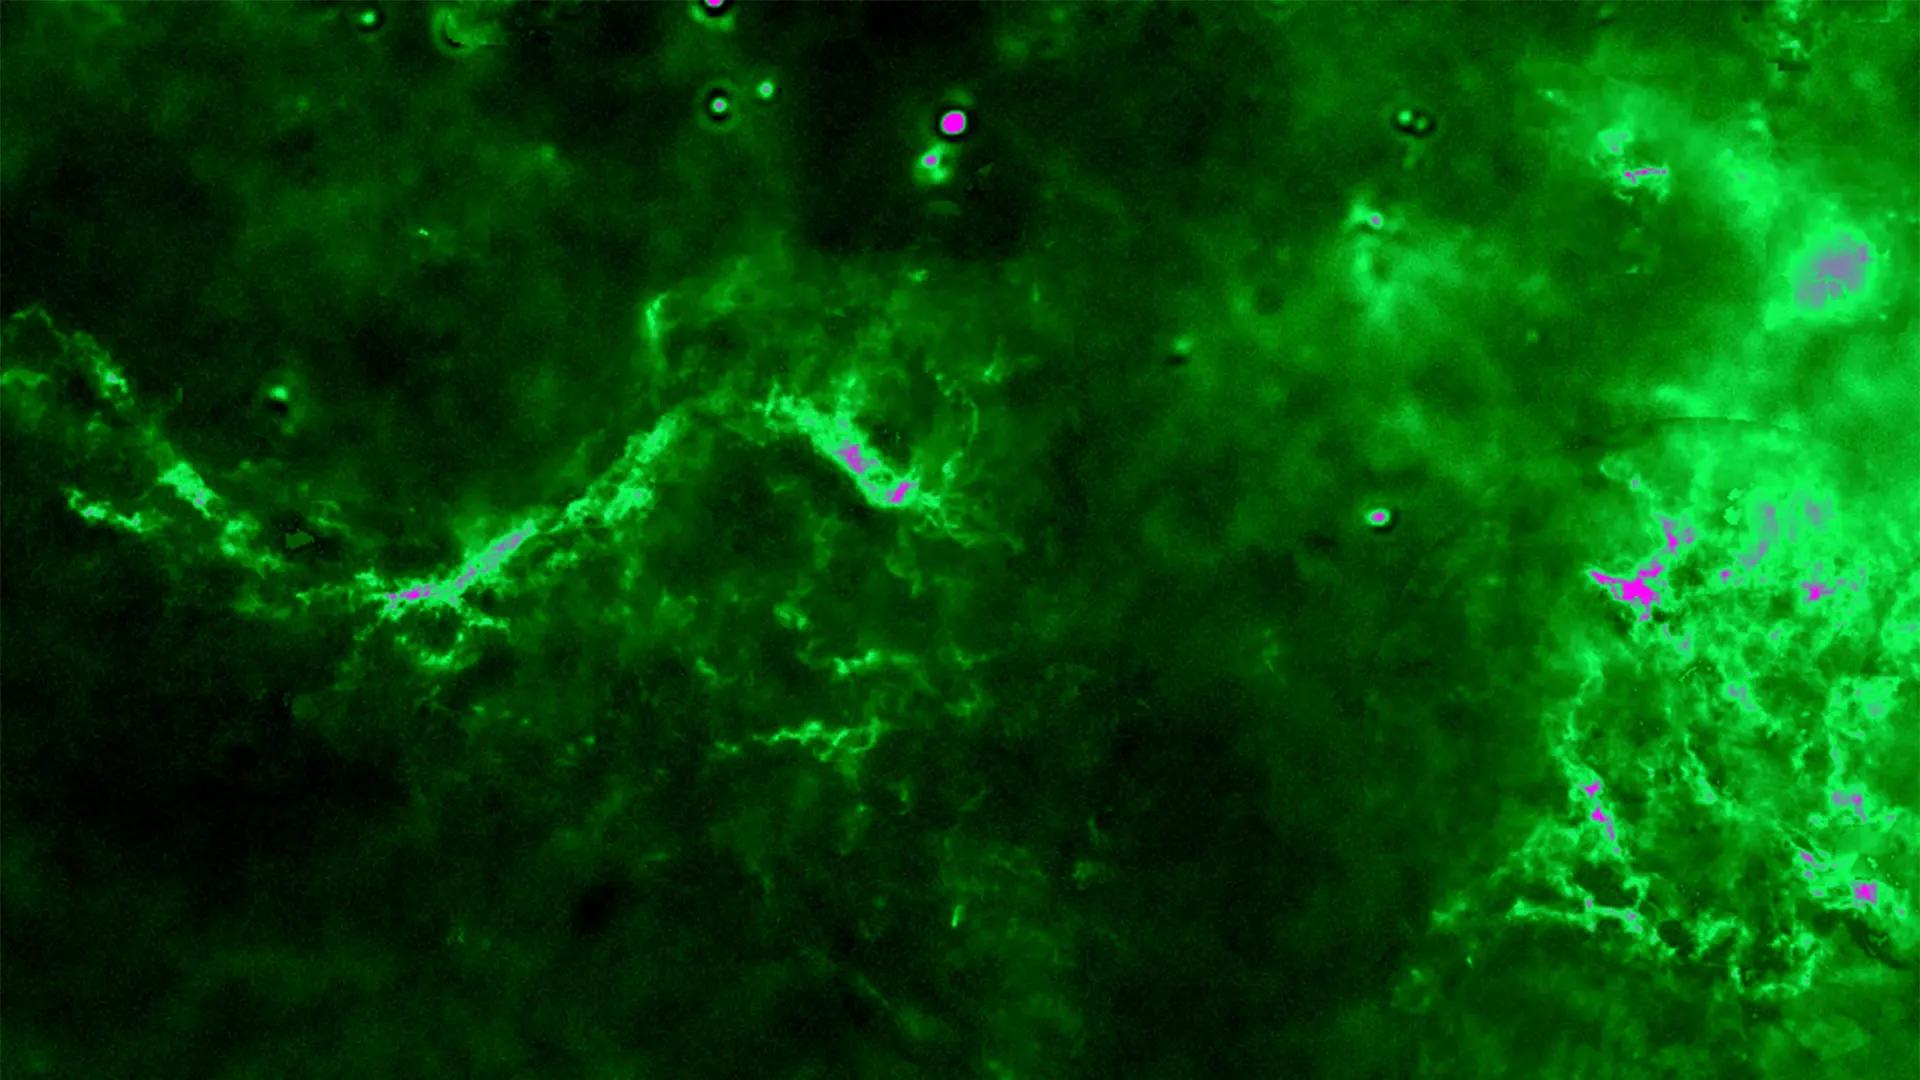 Molecular clouds mapped in the PROMISE survey